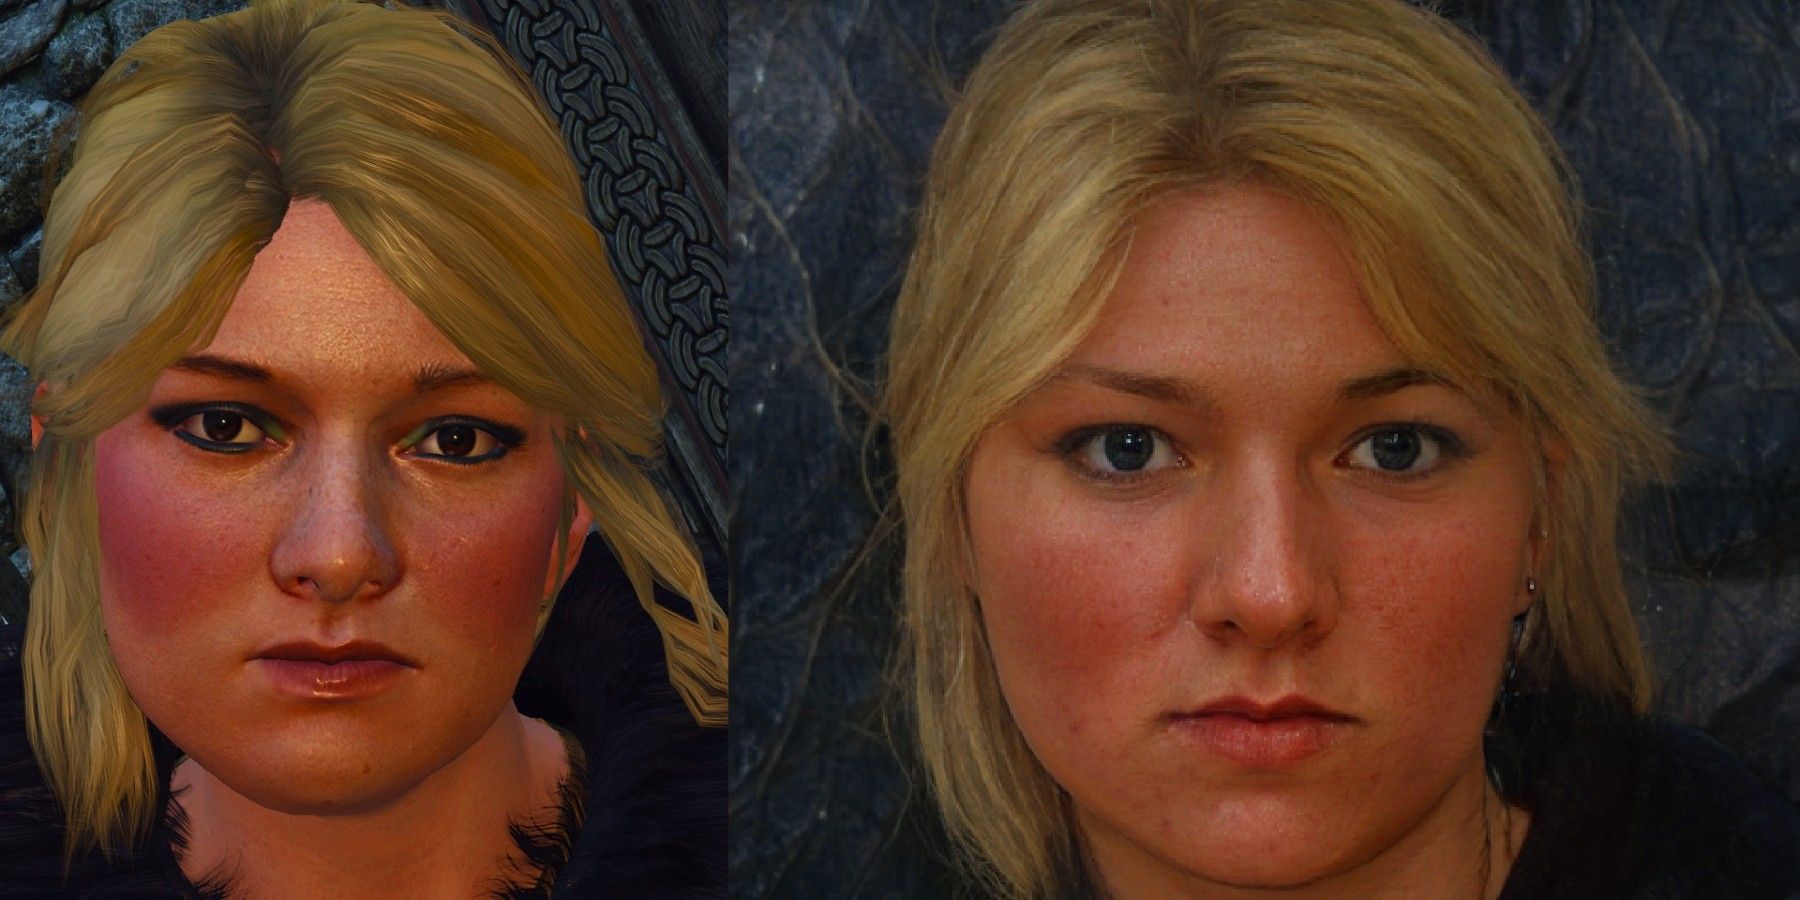 witcher blonde npc and ai recreation